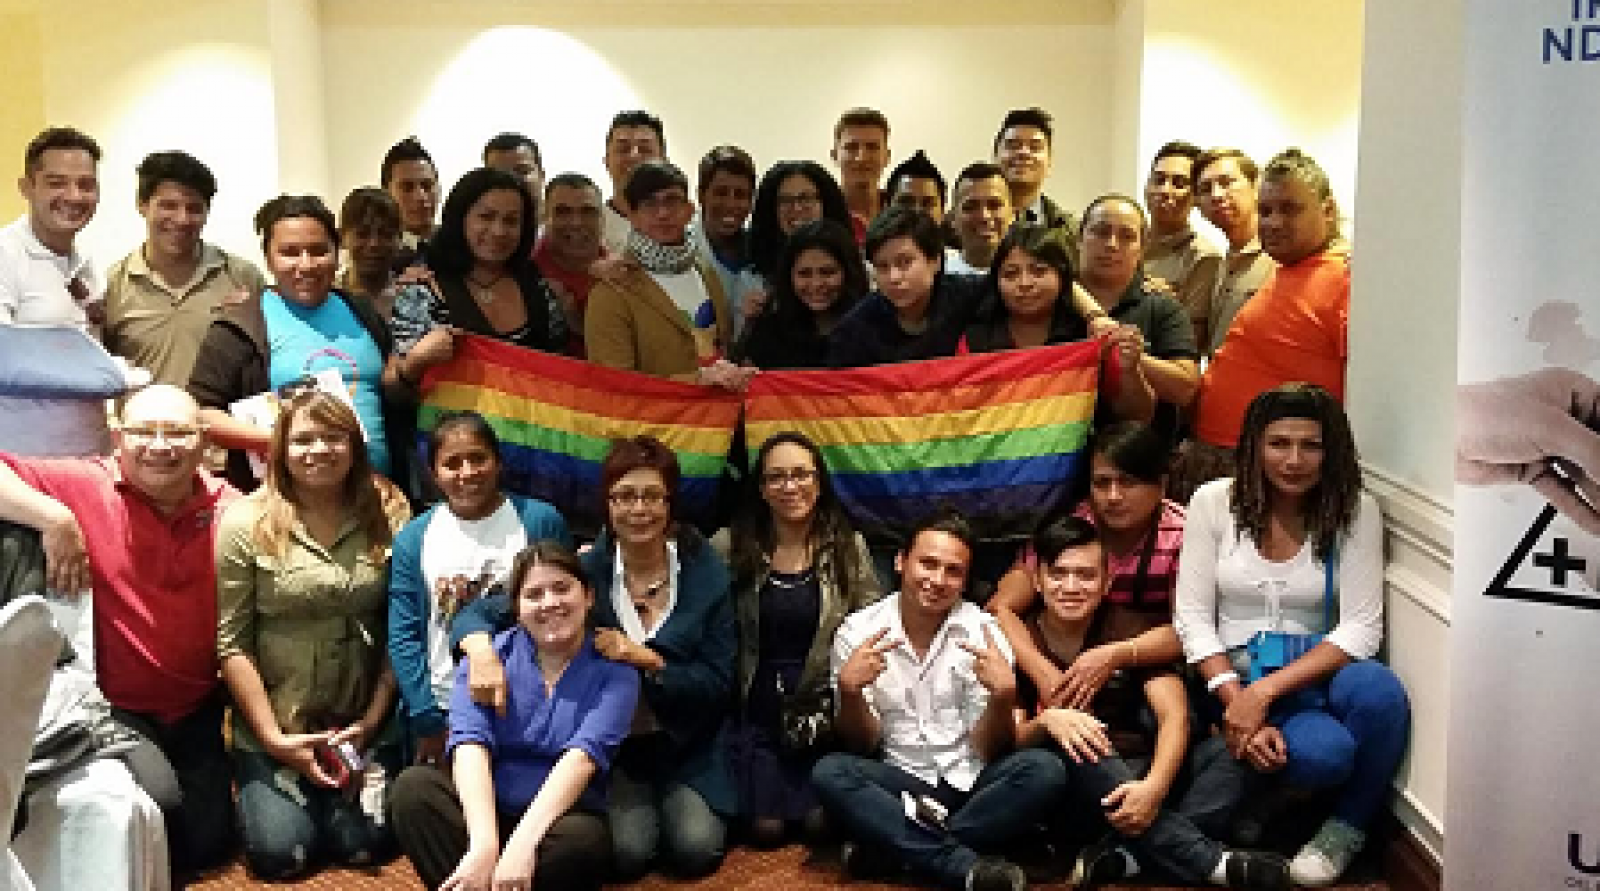 LGBTI Groups in Guatemala and Nicaragua Unite for Equality